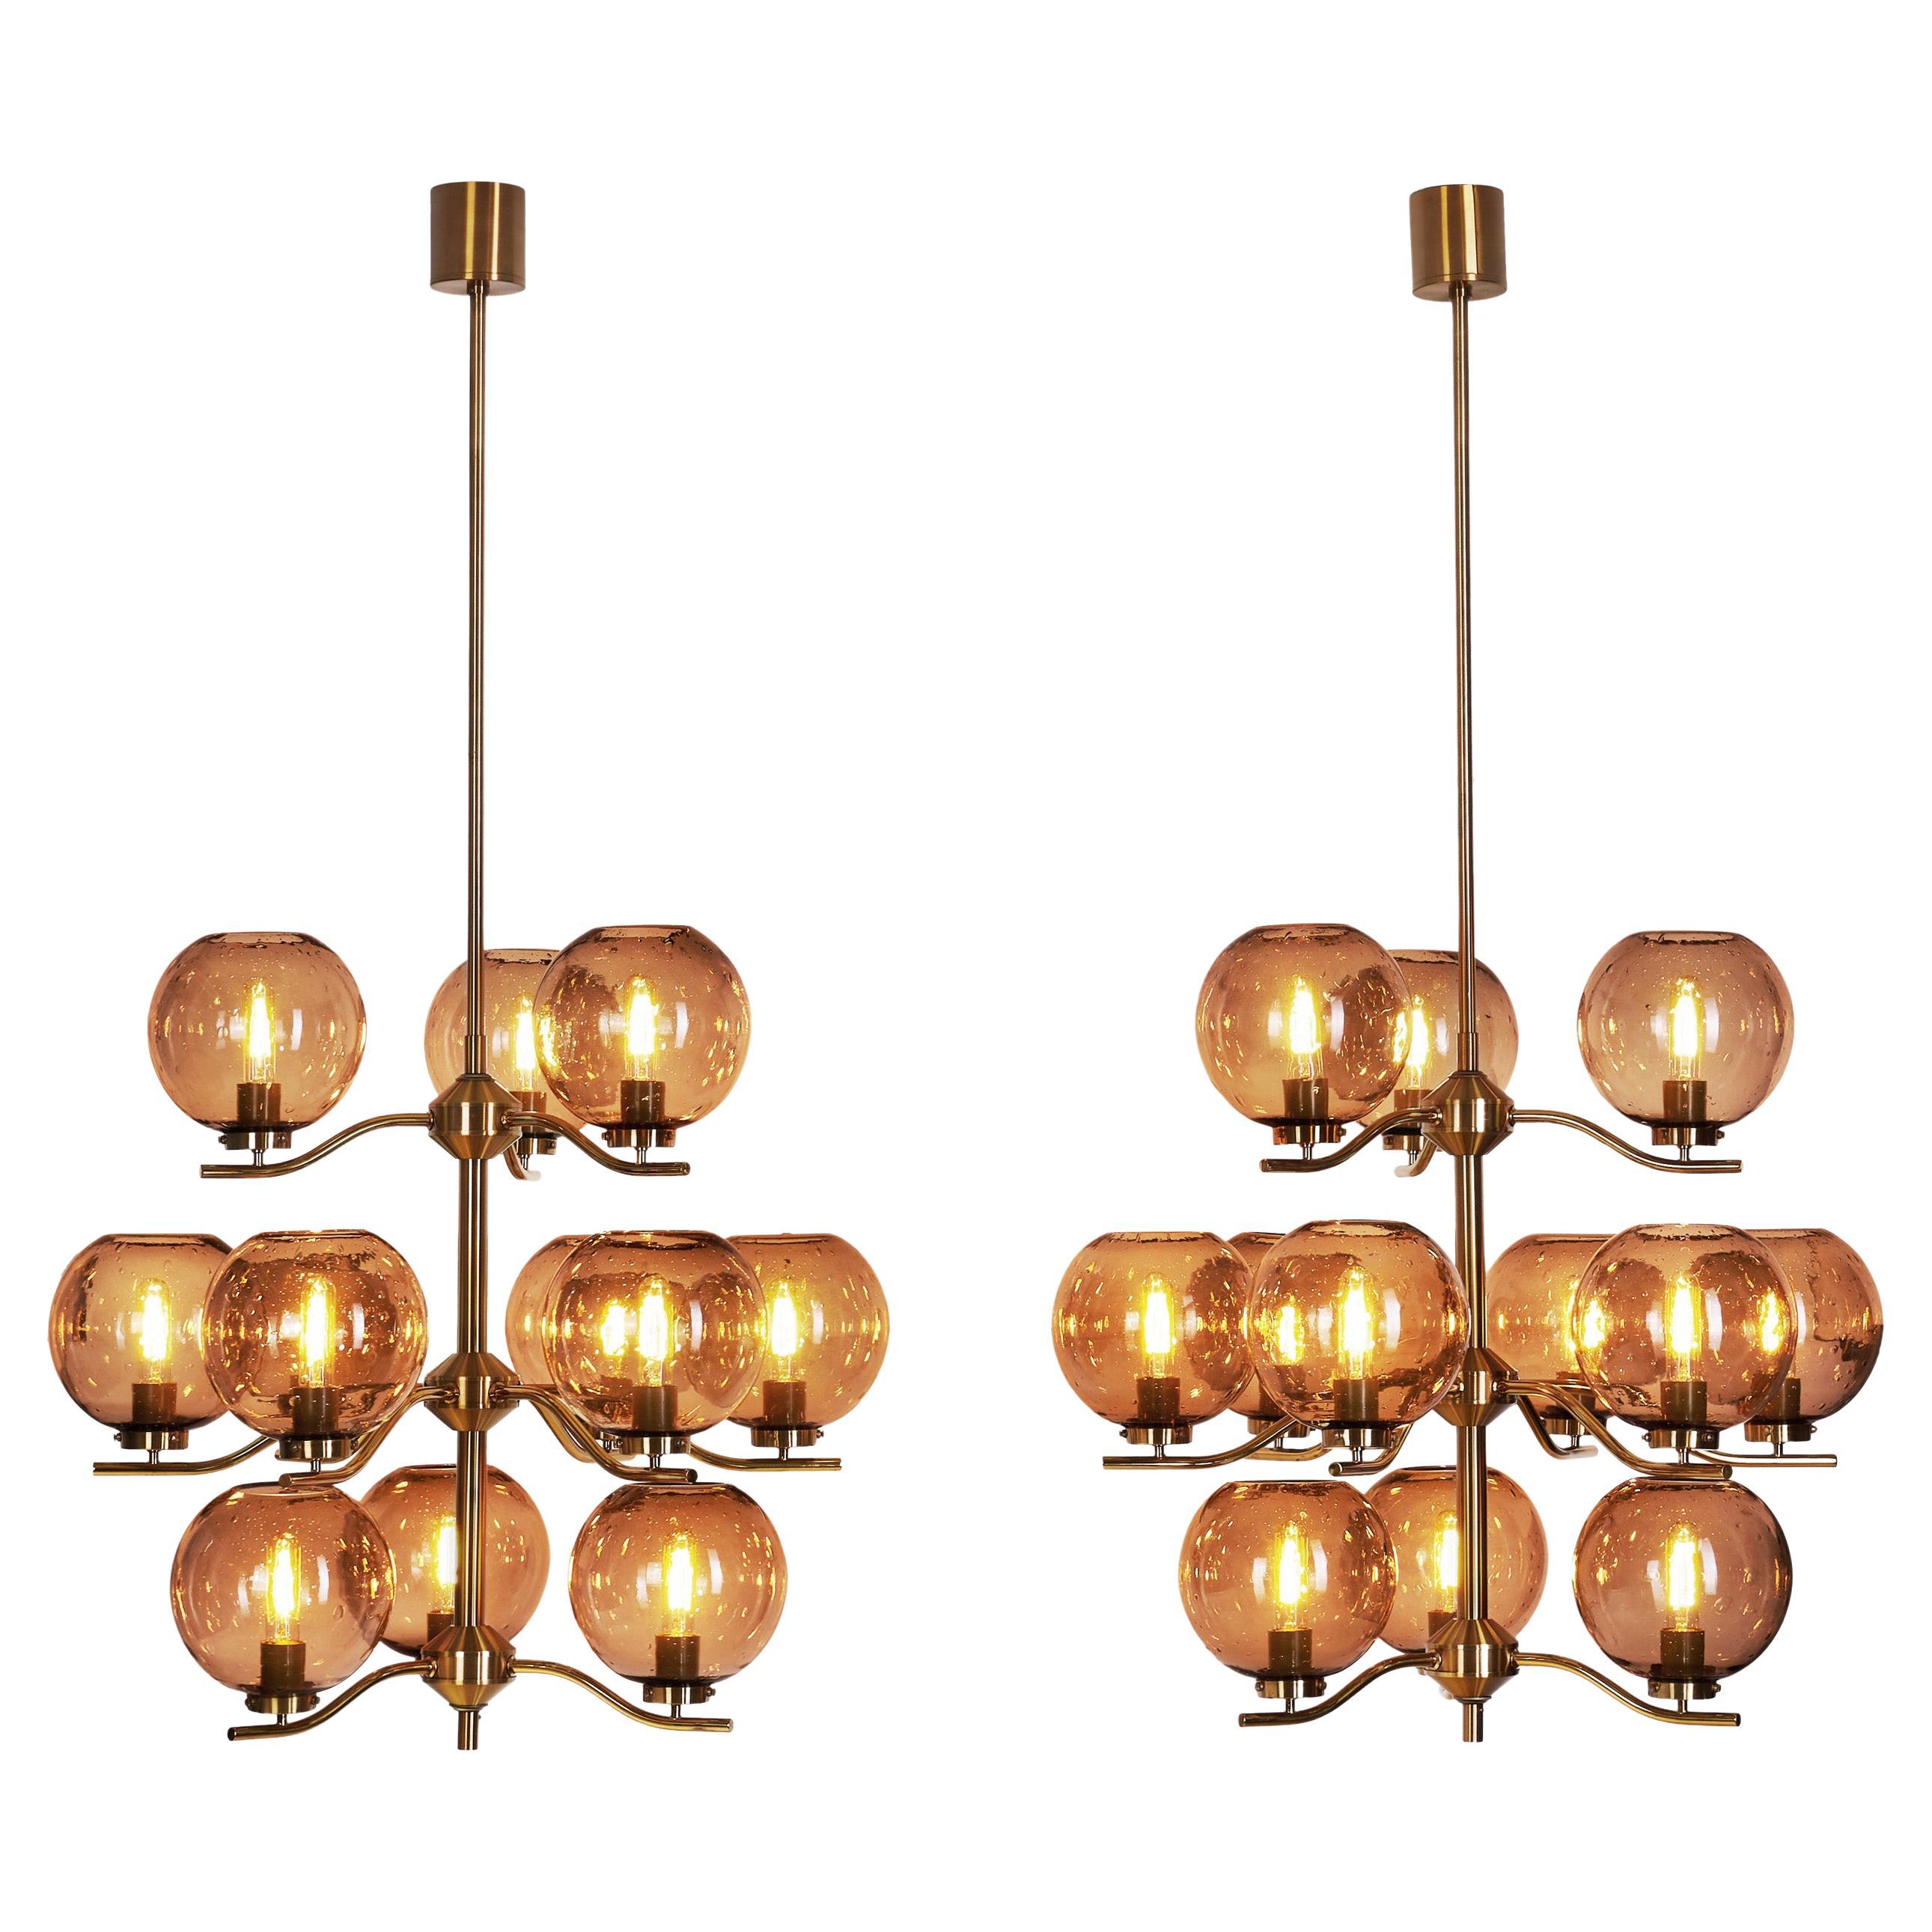 Holger Johansson Chandeliers with 12 Smoked Glass Shades, Sweden 1970s